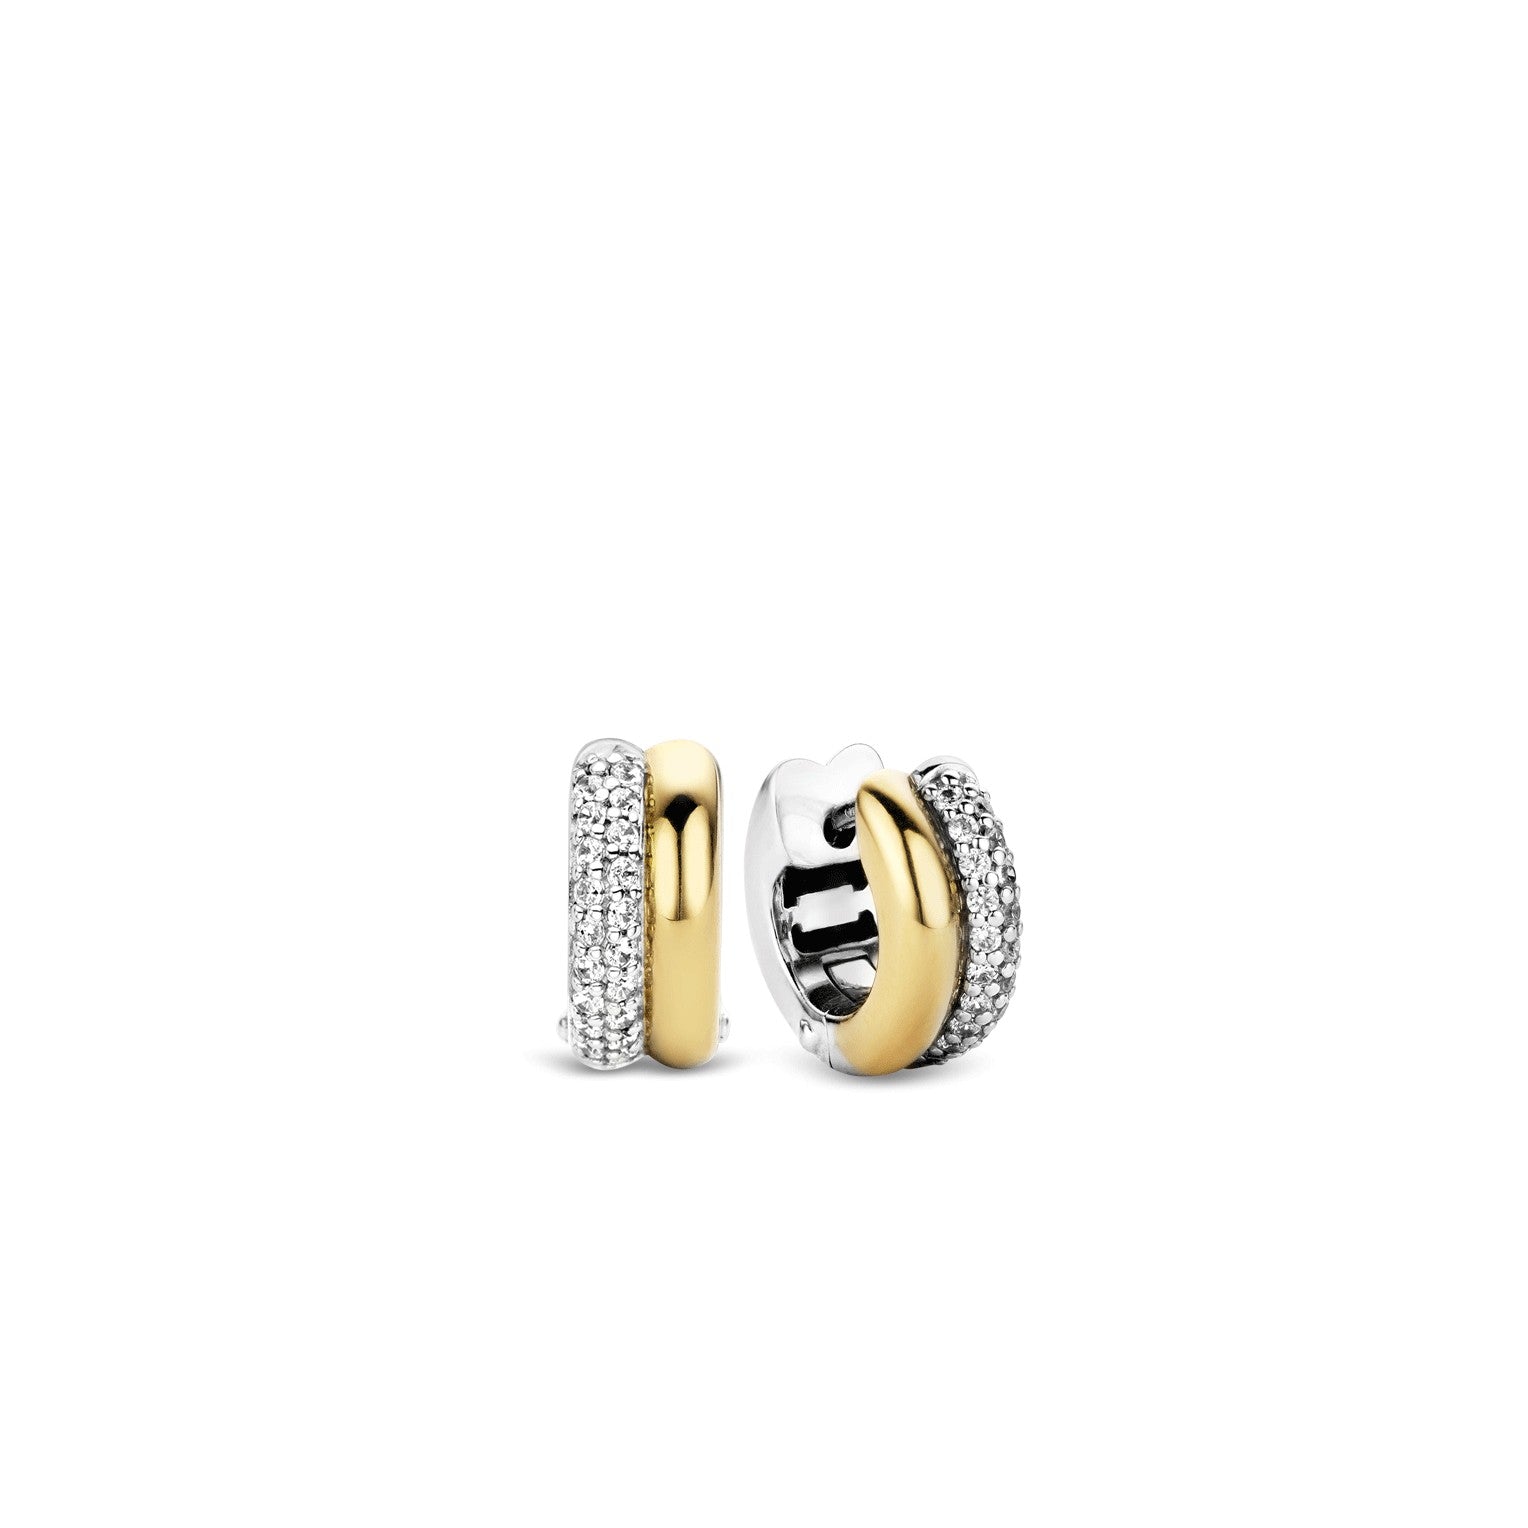 TI SENTO Sterling Silver Two Tone Hoop Earrings with Pave Set Cubic Zirconia